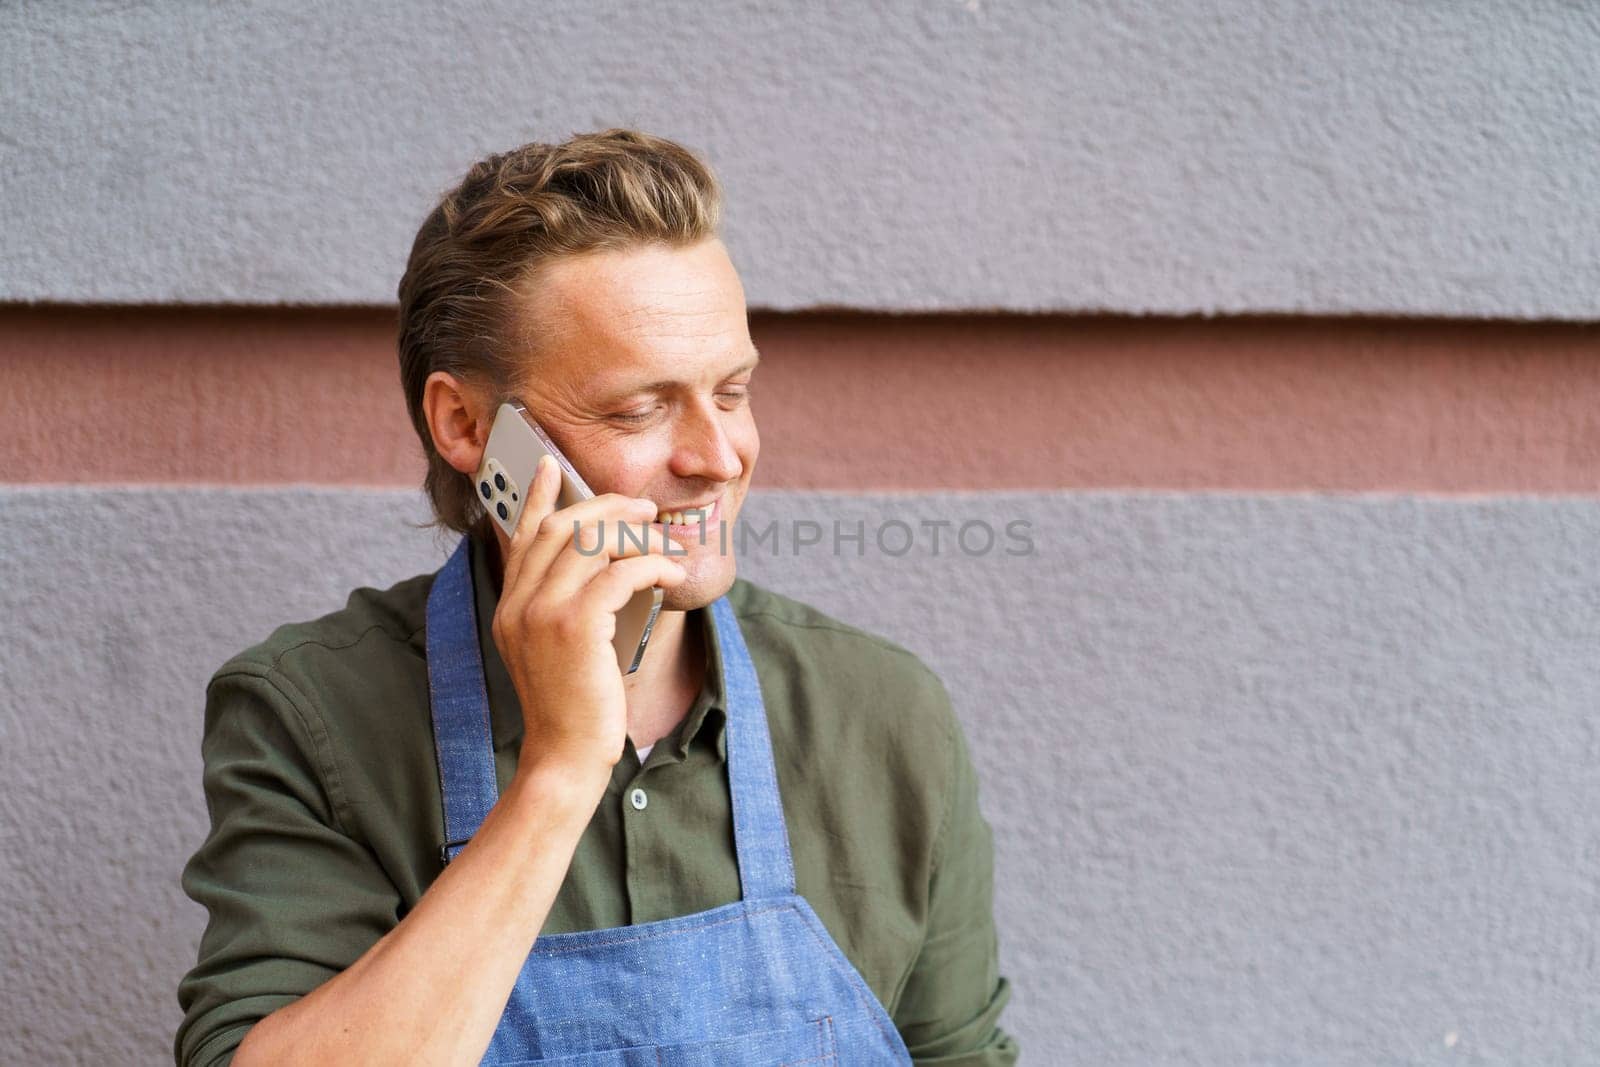 Restaurant worker receive call from client on mobile phone. With focus on communication and customer service, worker exemplifies dedication and multitasking abilities required in restaurant industry. by LipikStockMedia